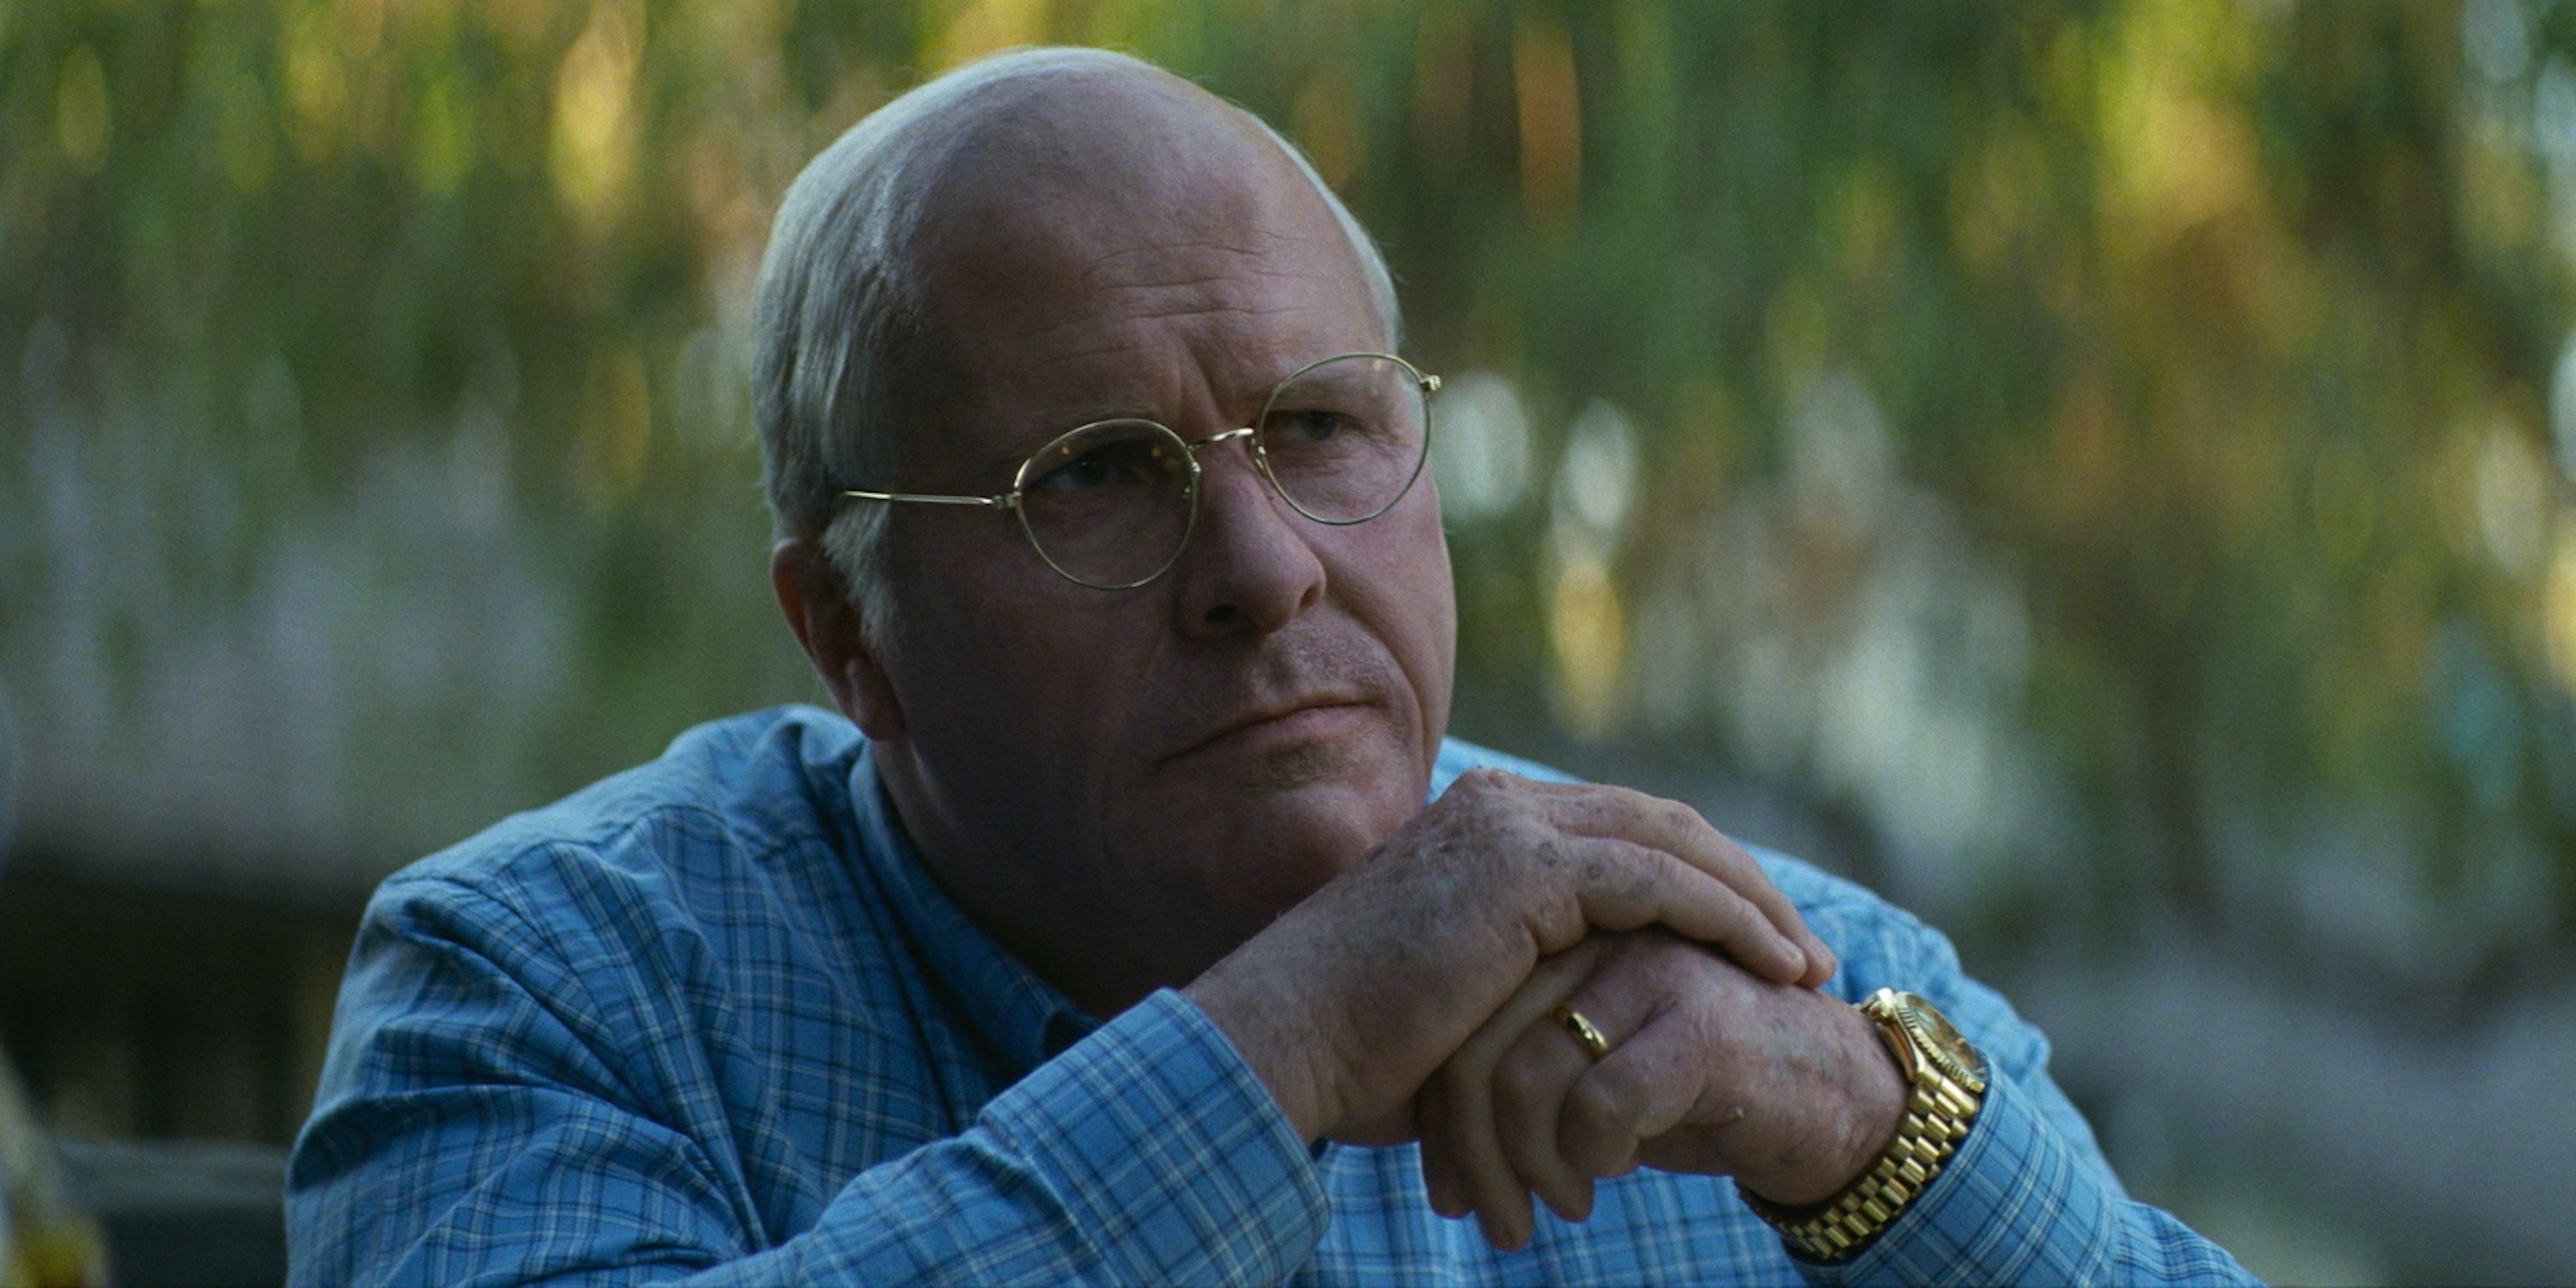 Christian Bale in Vice as Dick Cheney